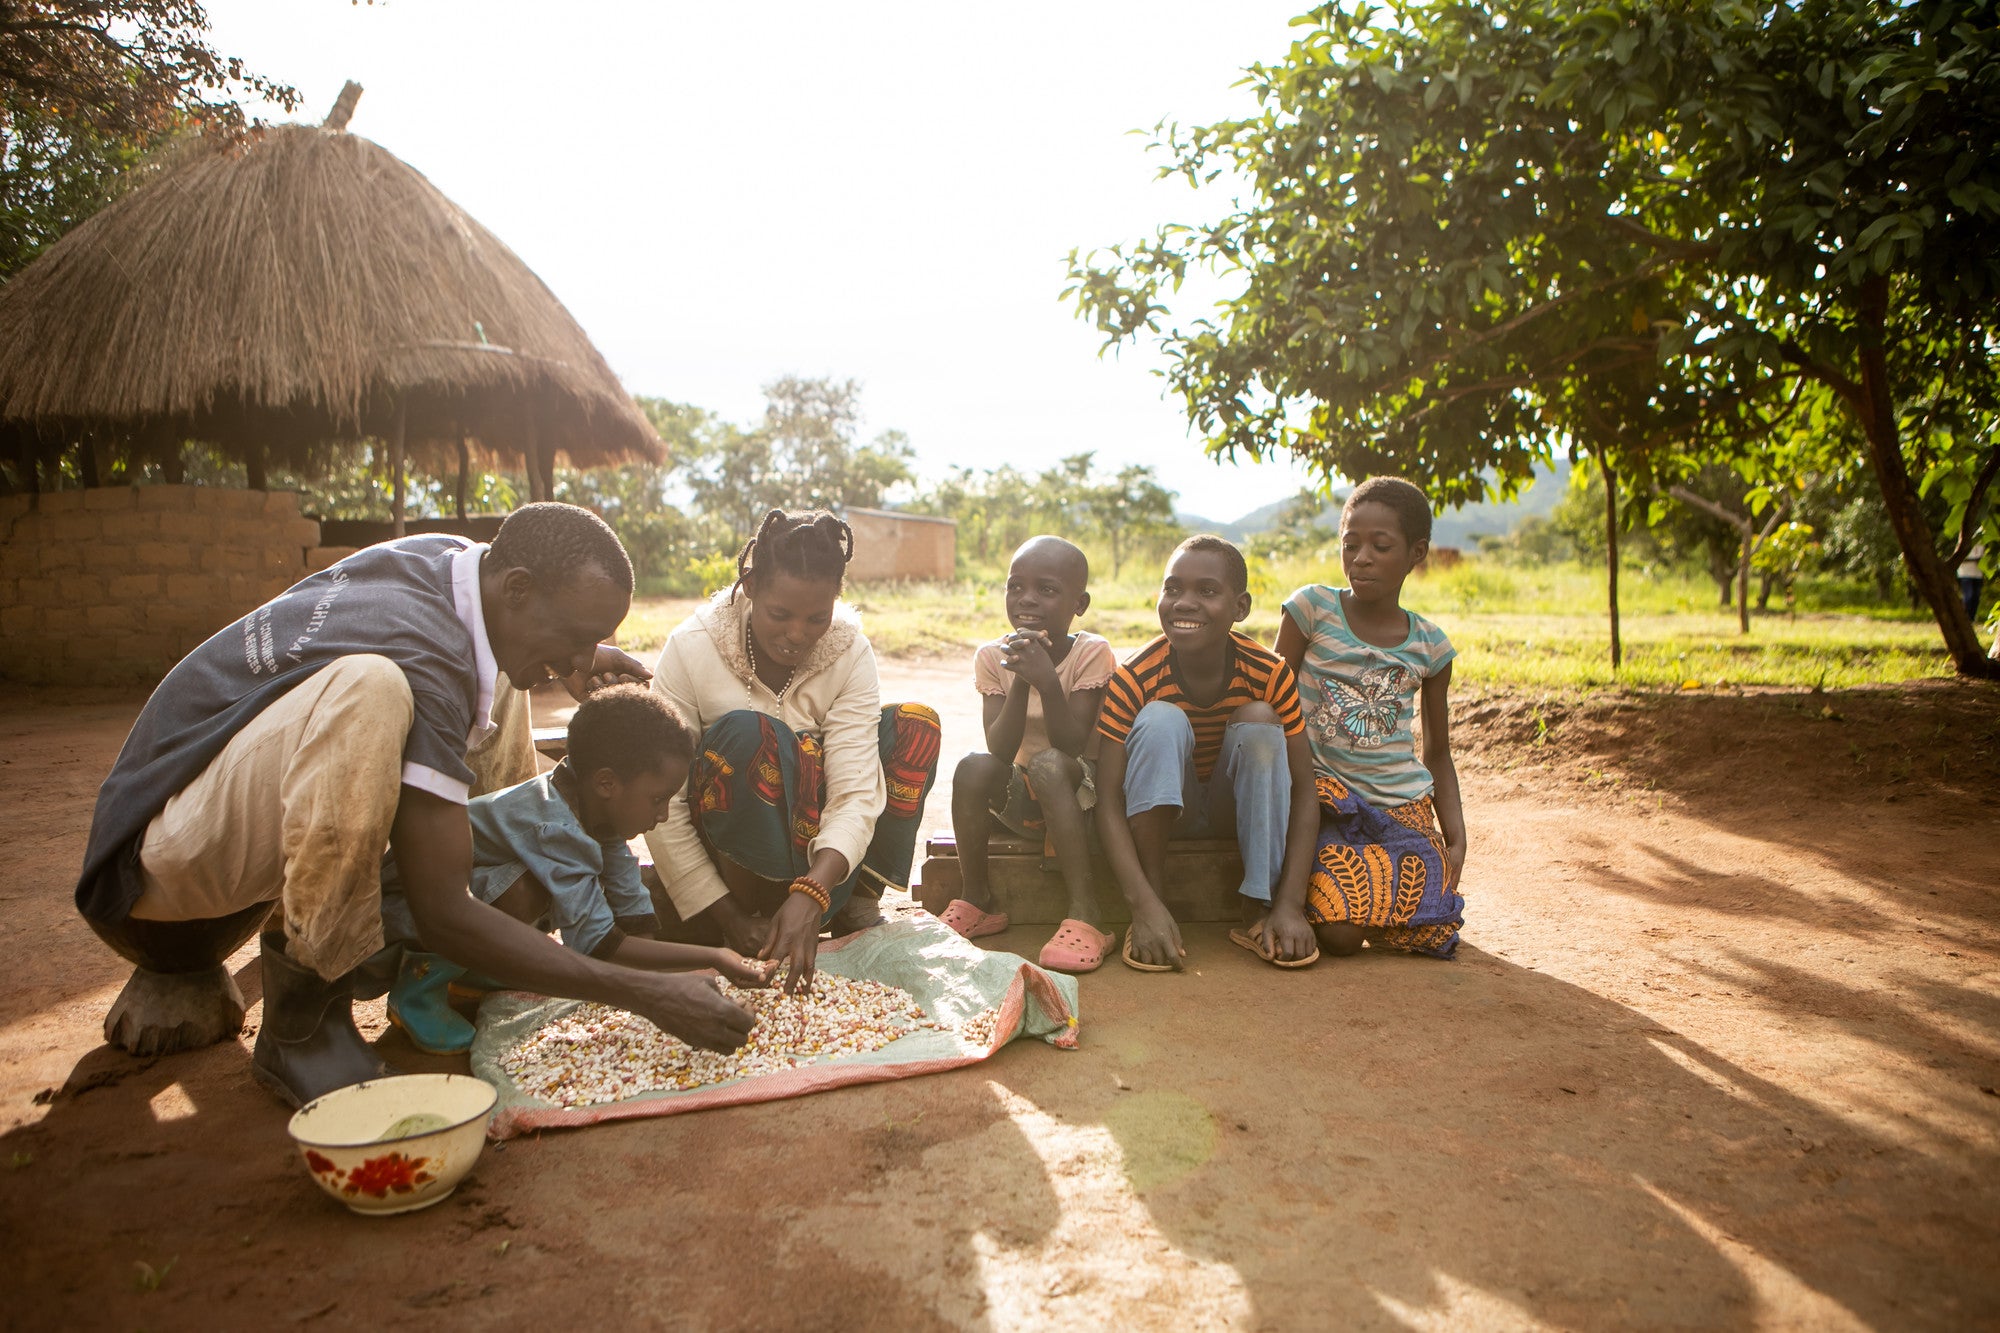 A family sits outside sorting seeds.